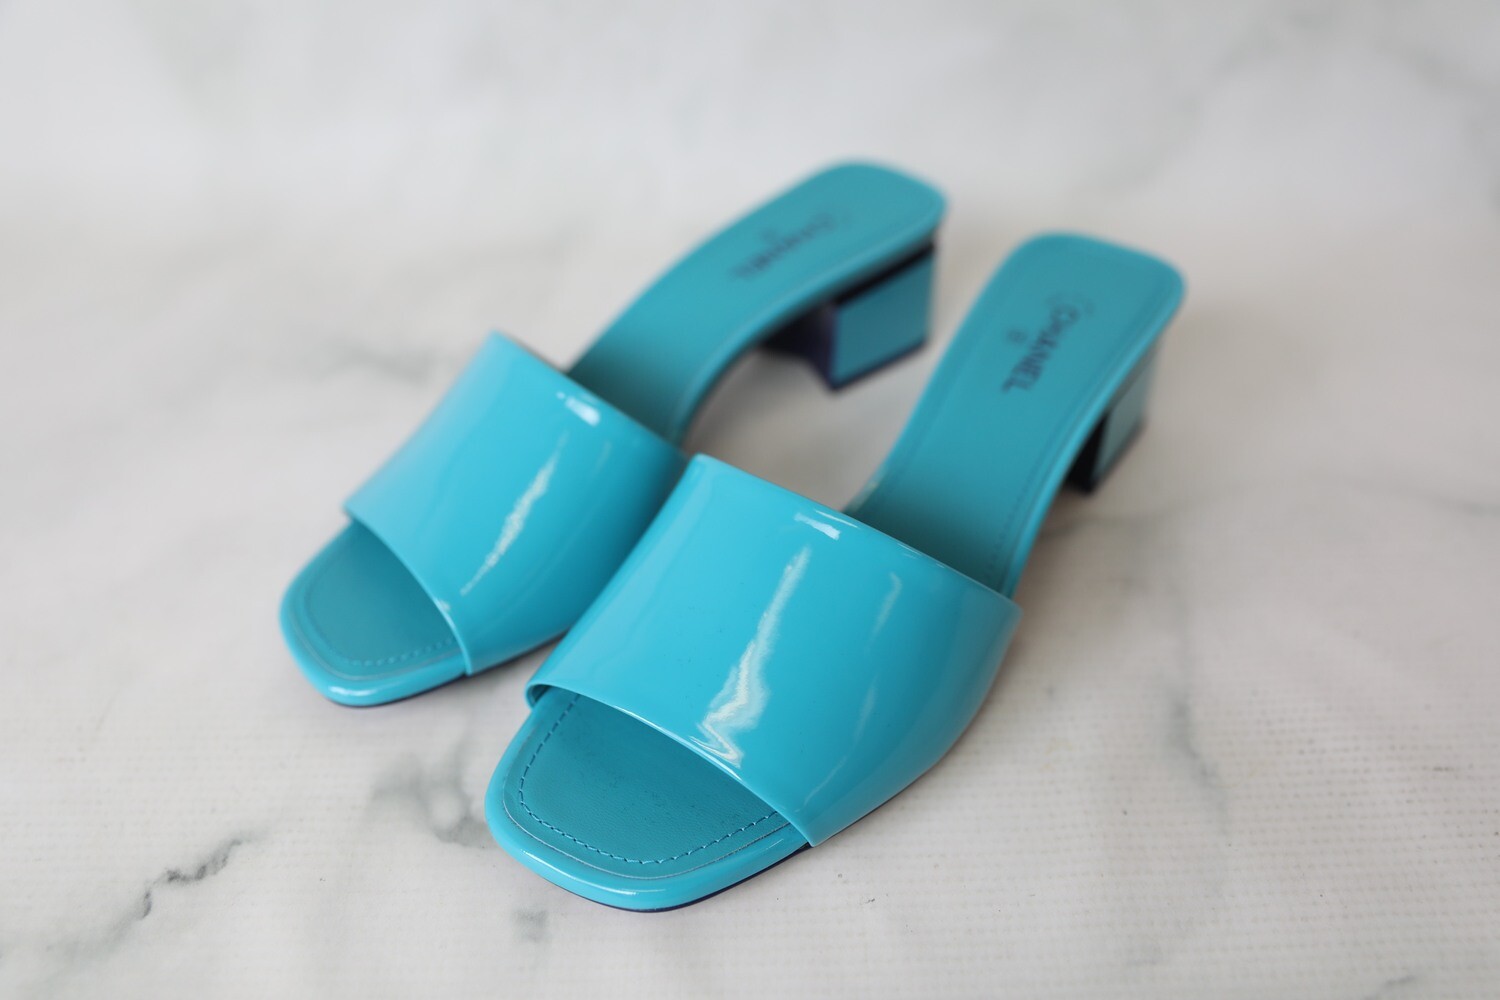 Chanel Shoes Slide Mules with Mid Heel, Blue, Size 38.5, New in